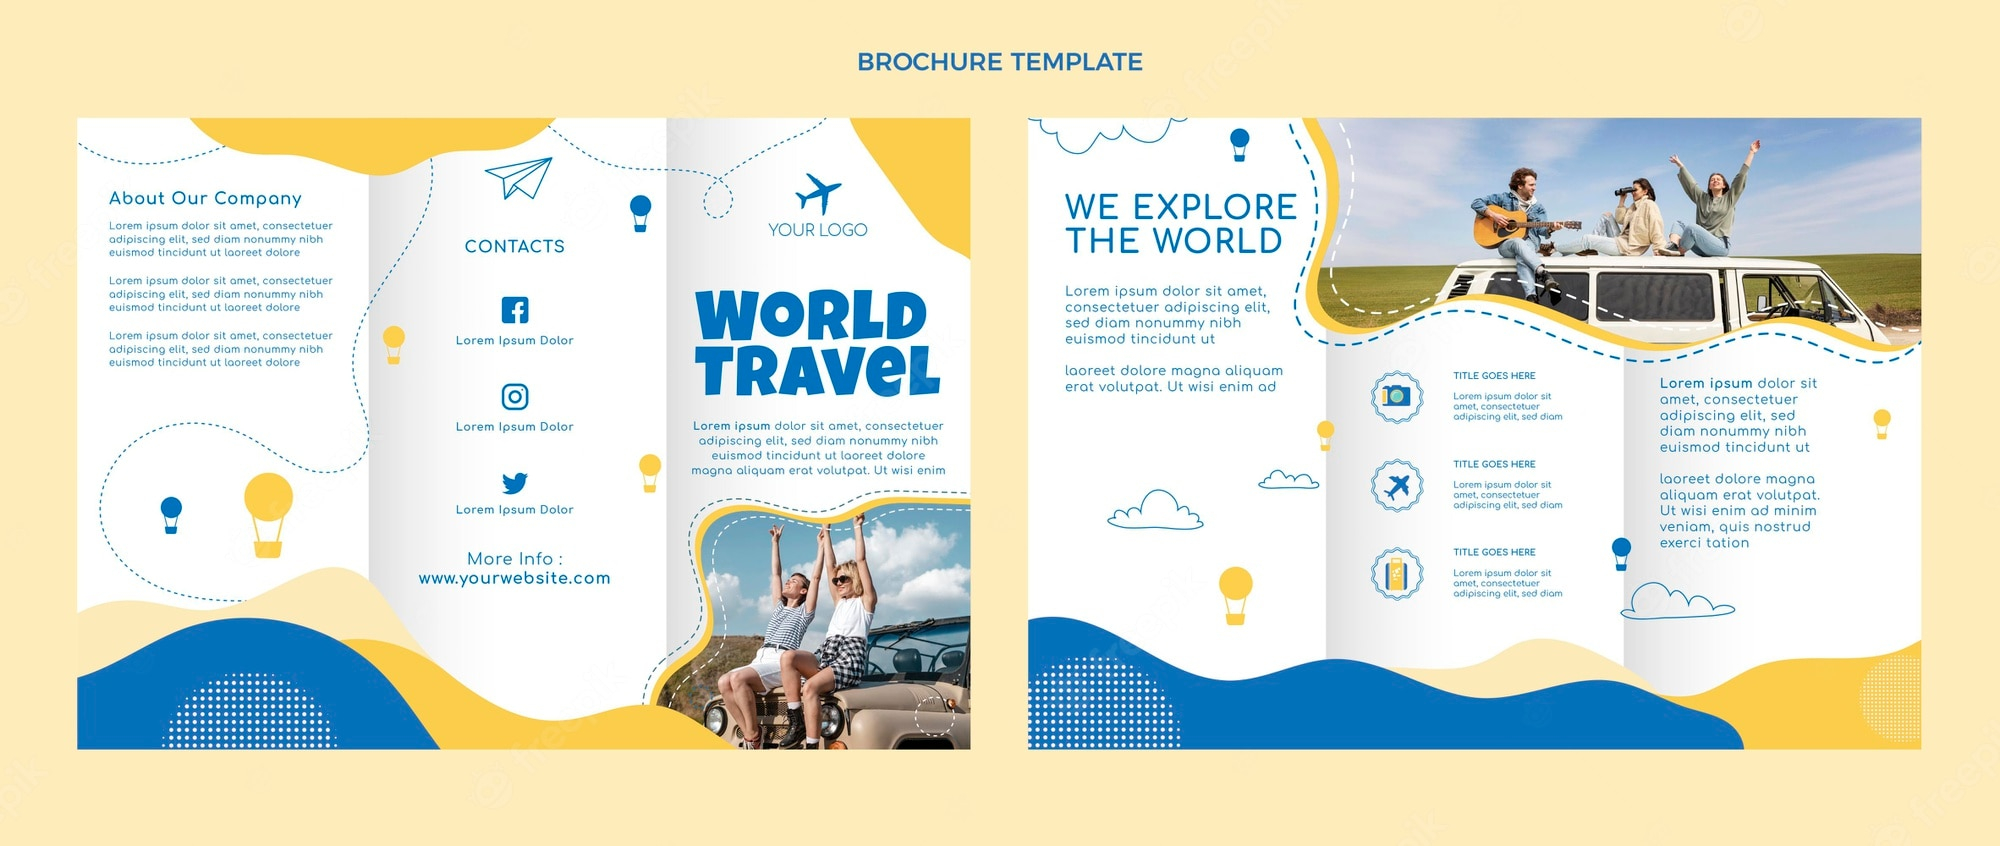 Travel brochure template Vectors & Illustrations for Free Download  Intended For Travel Guide Brochure Template